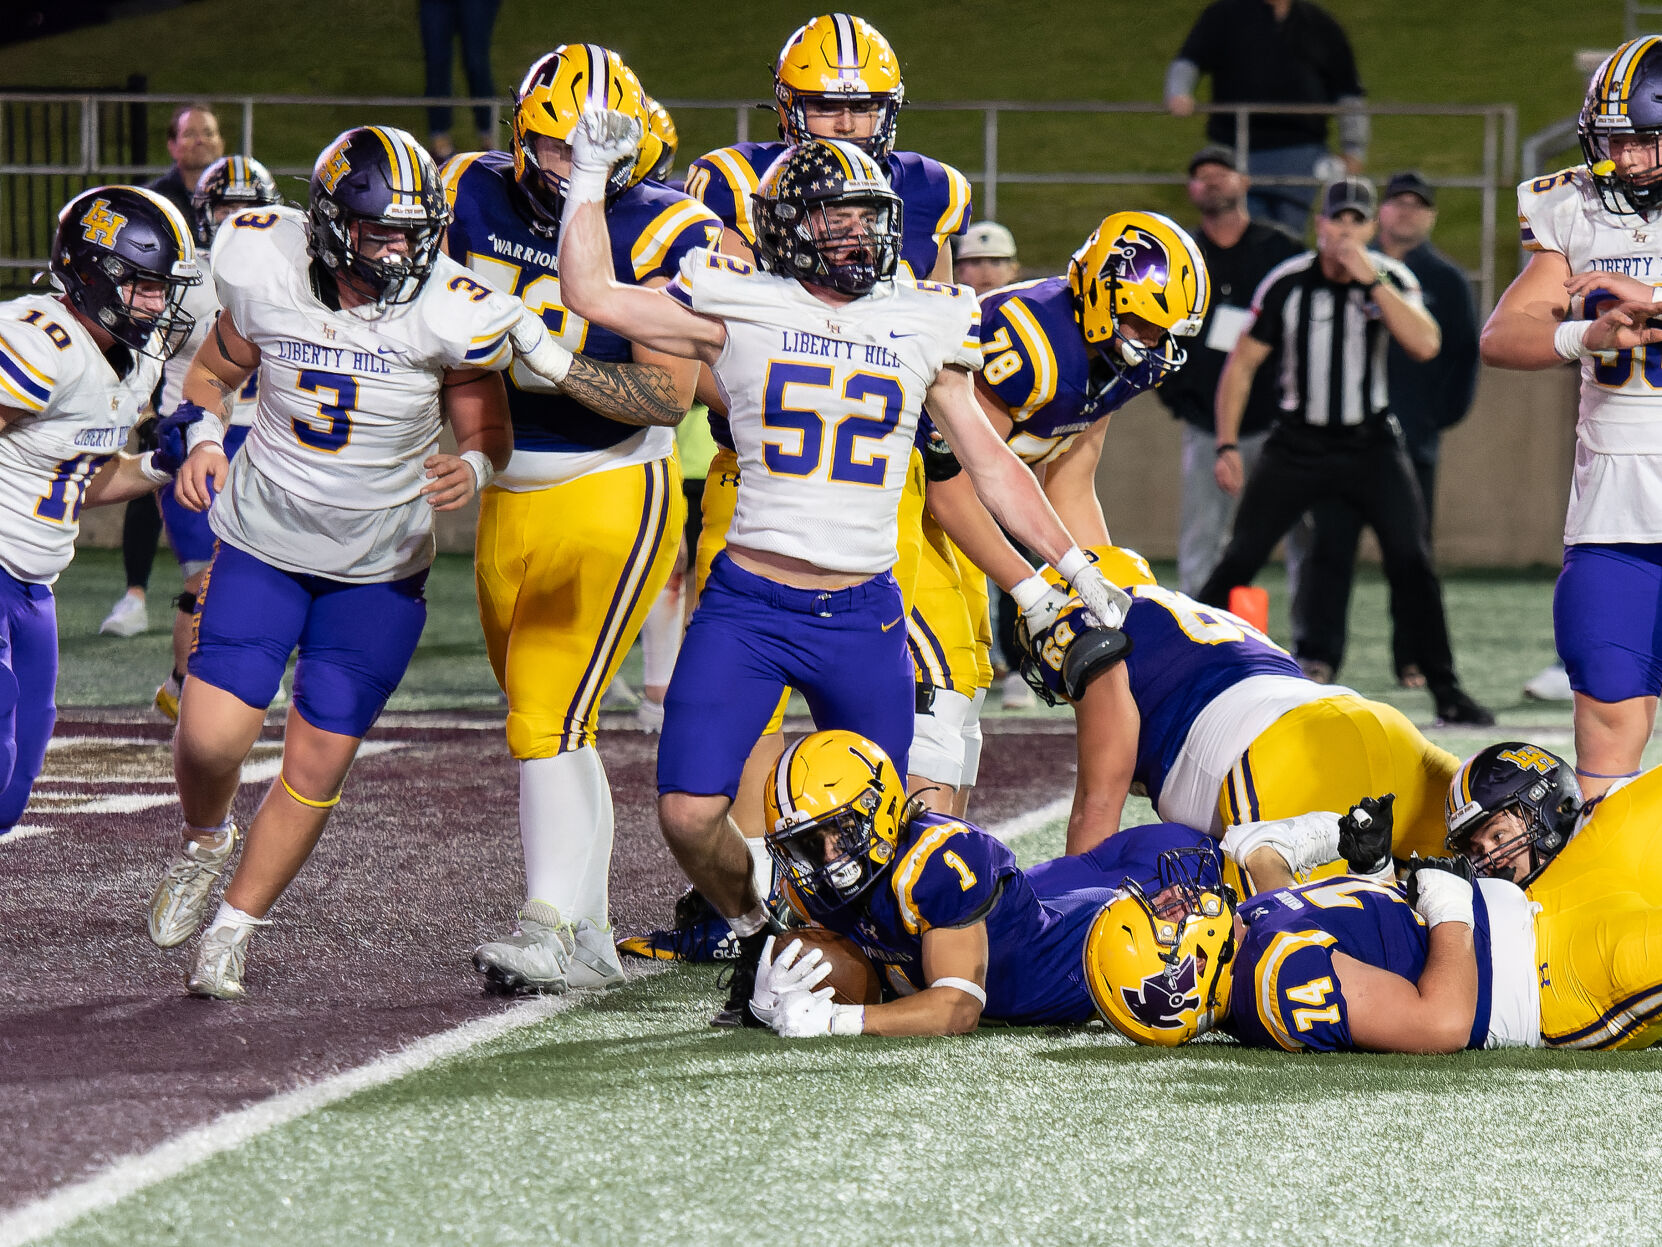 Liberty Hill Dominates Pieper with Strong Defense in State Semifinal Win